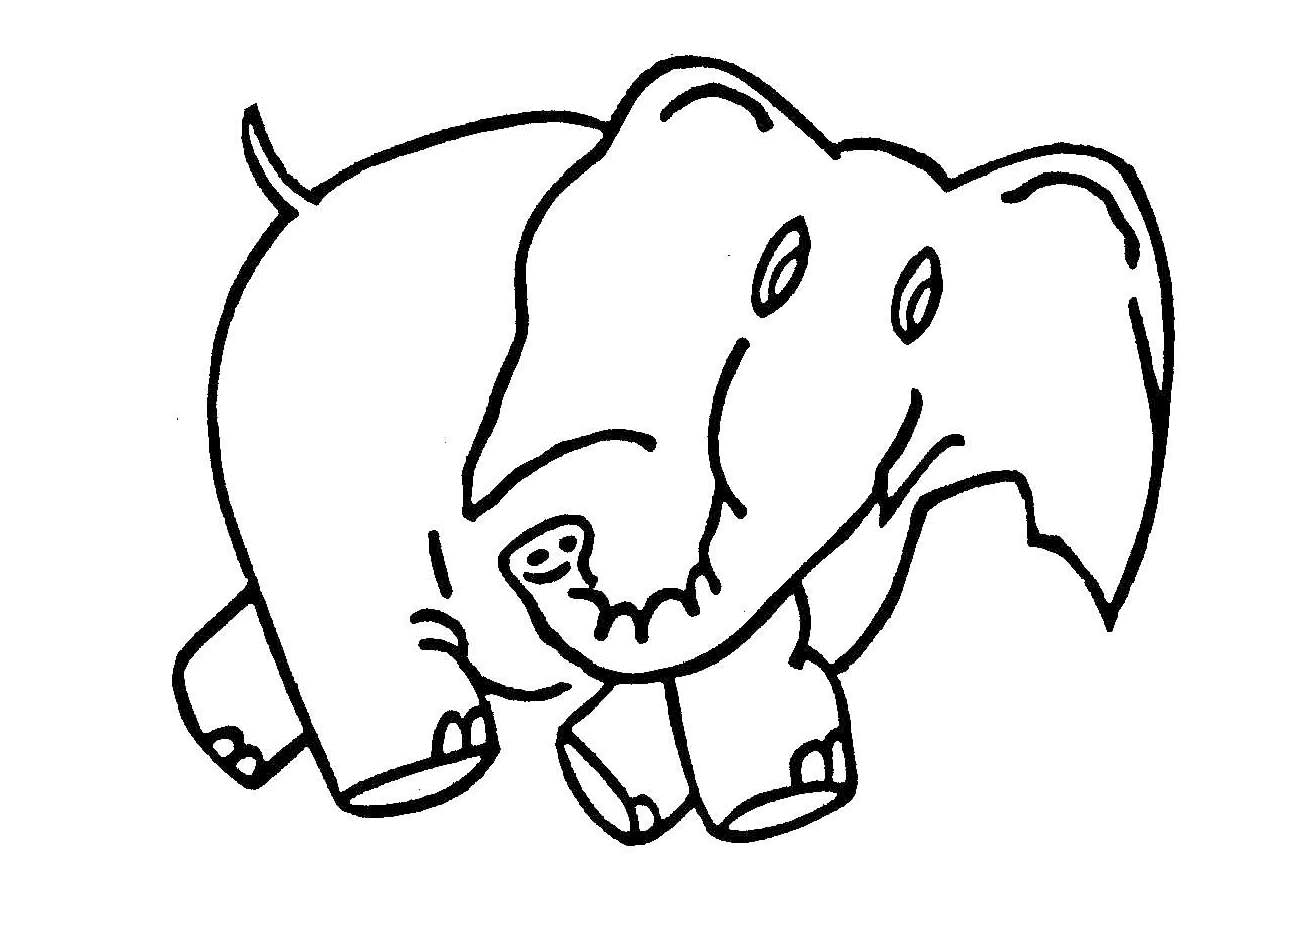 Free Elephant Drawings Images, Download Free Clip Art ...